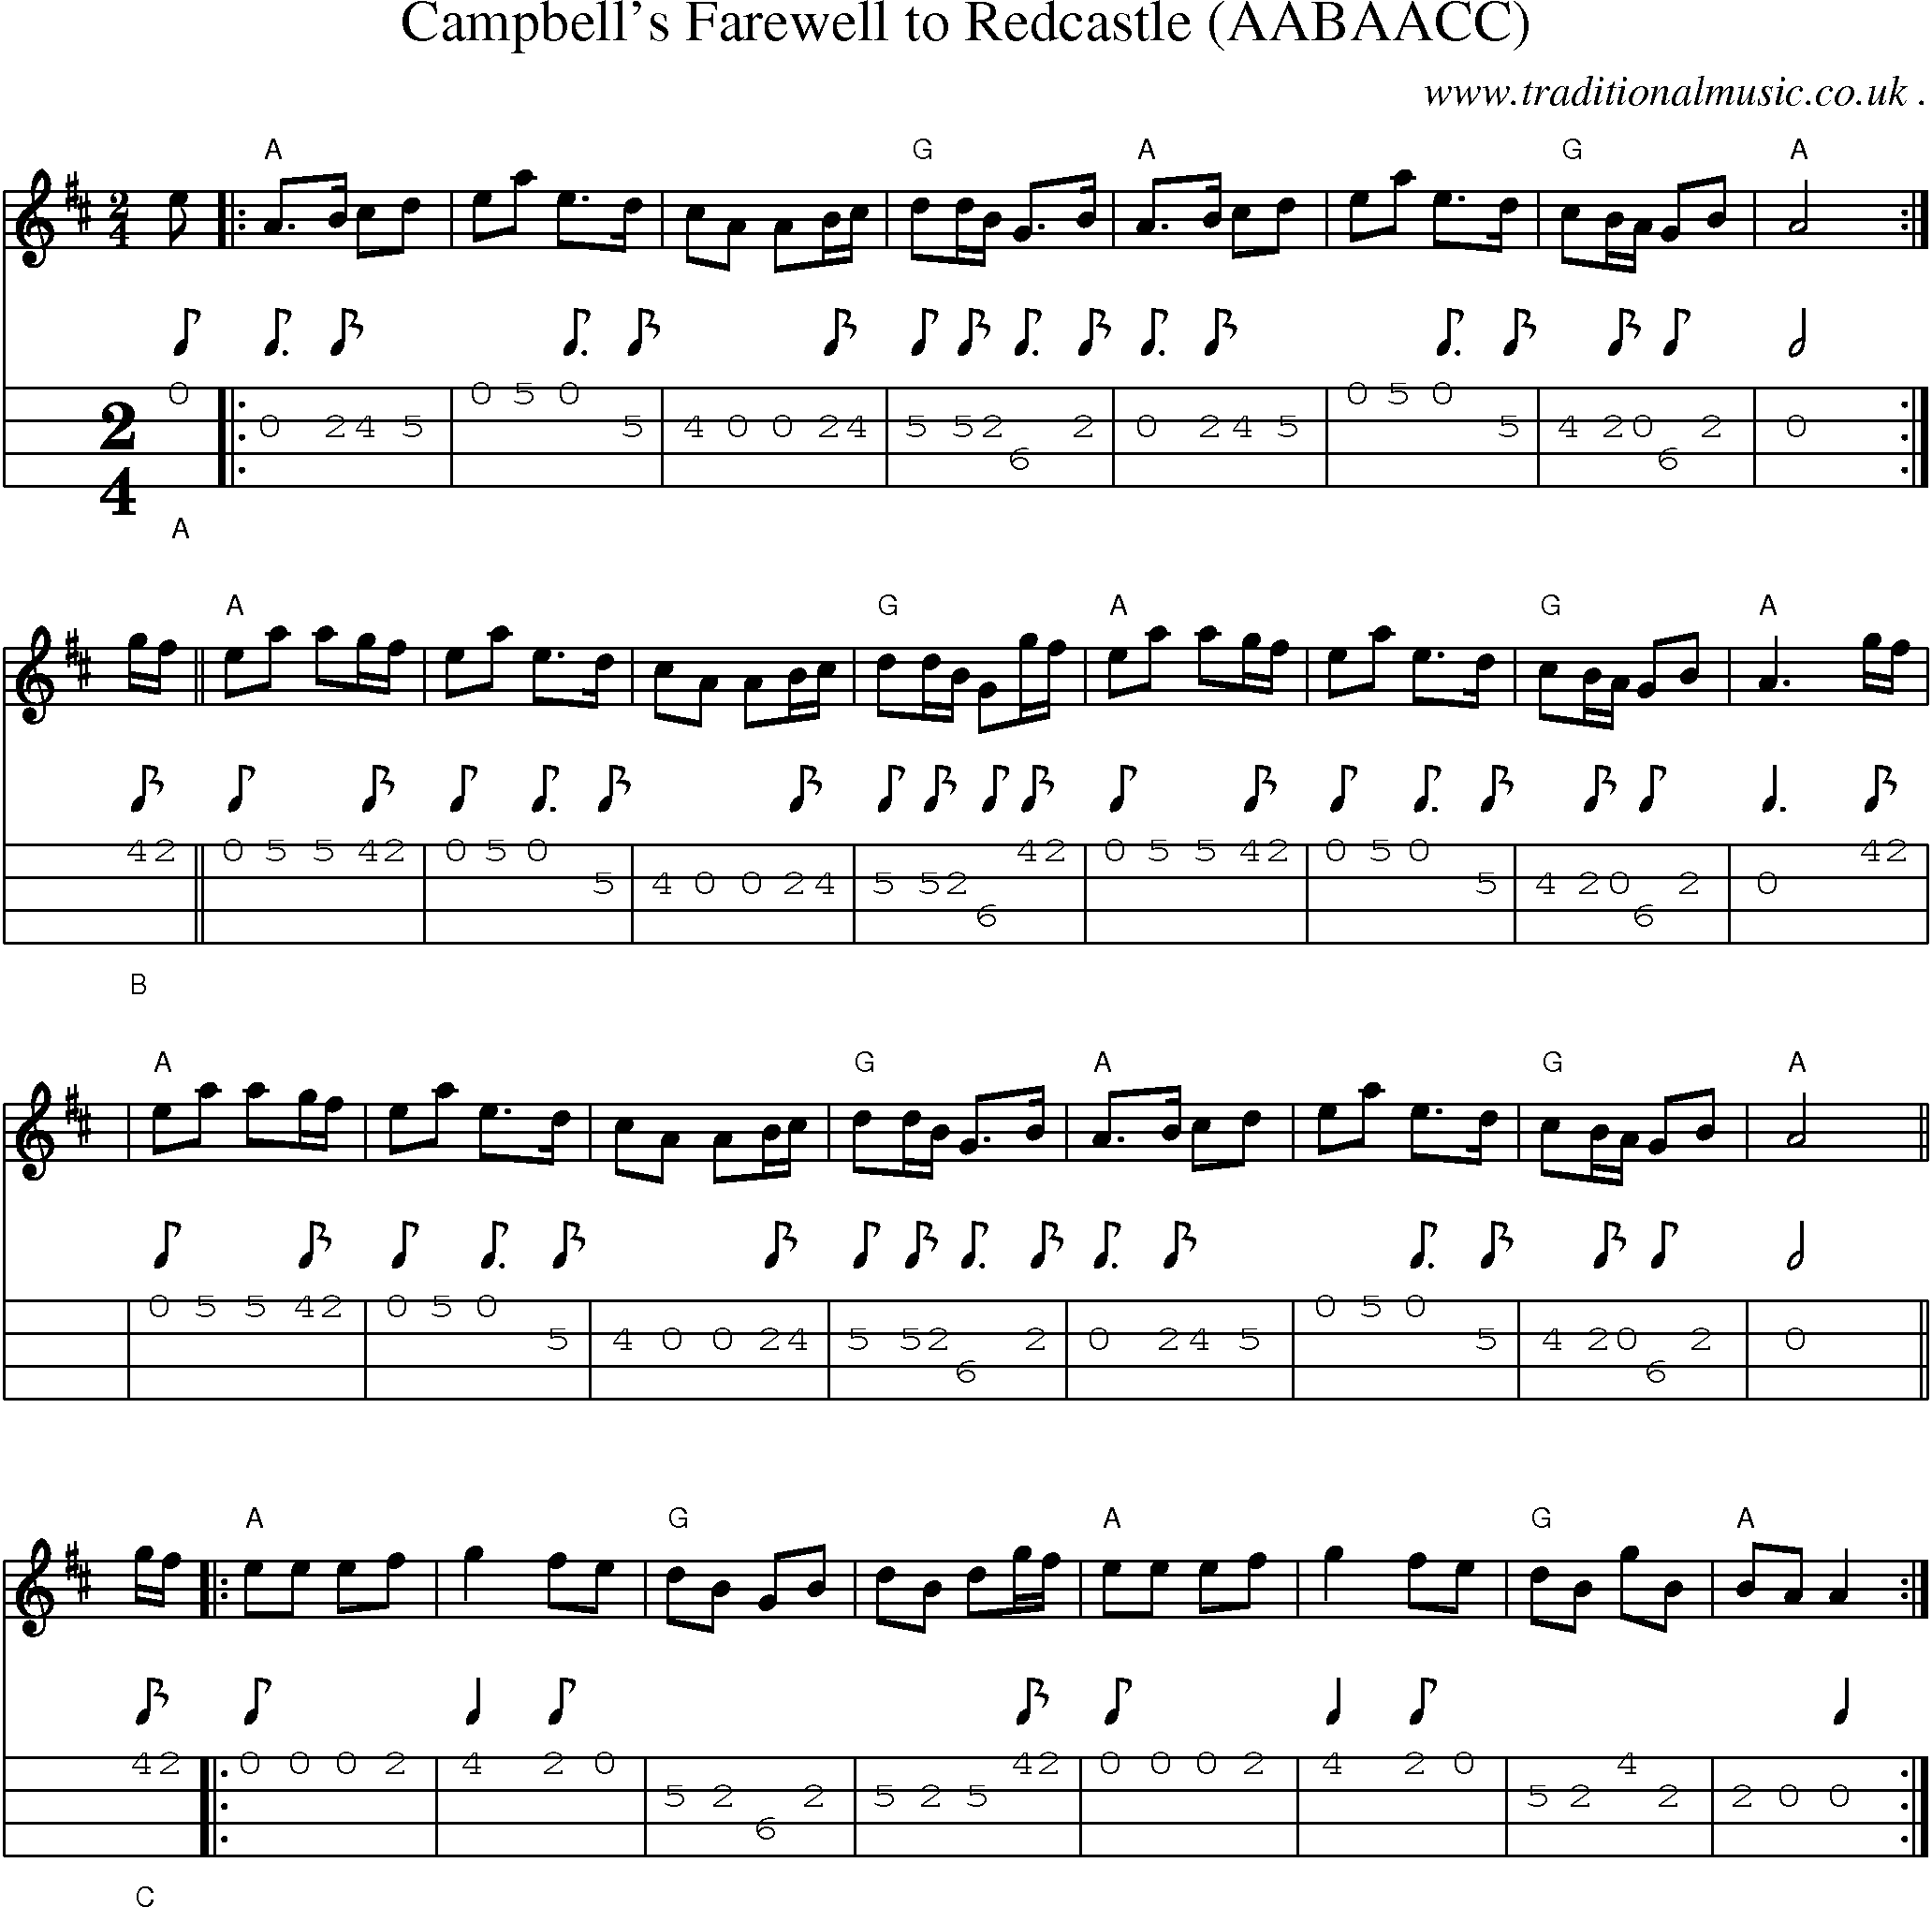 Sheet-music  score, Chords and Mandolin Tabs for Campbells Farewell To Redcastle Aabaacc